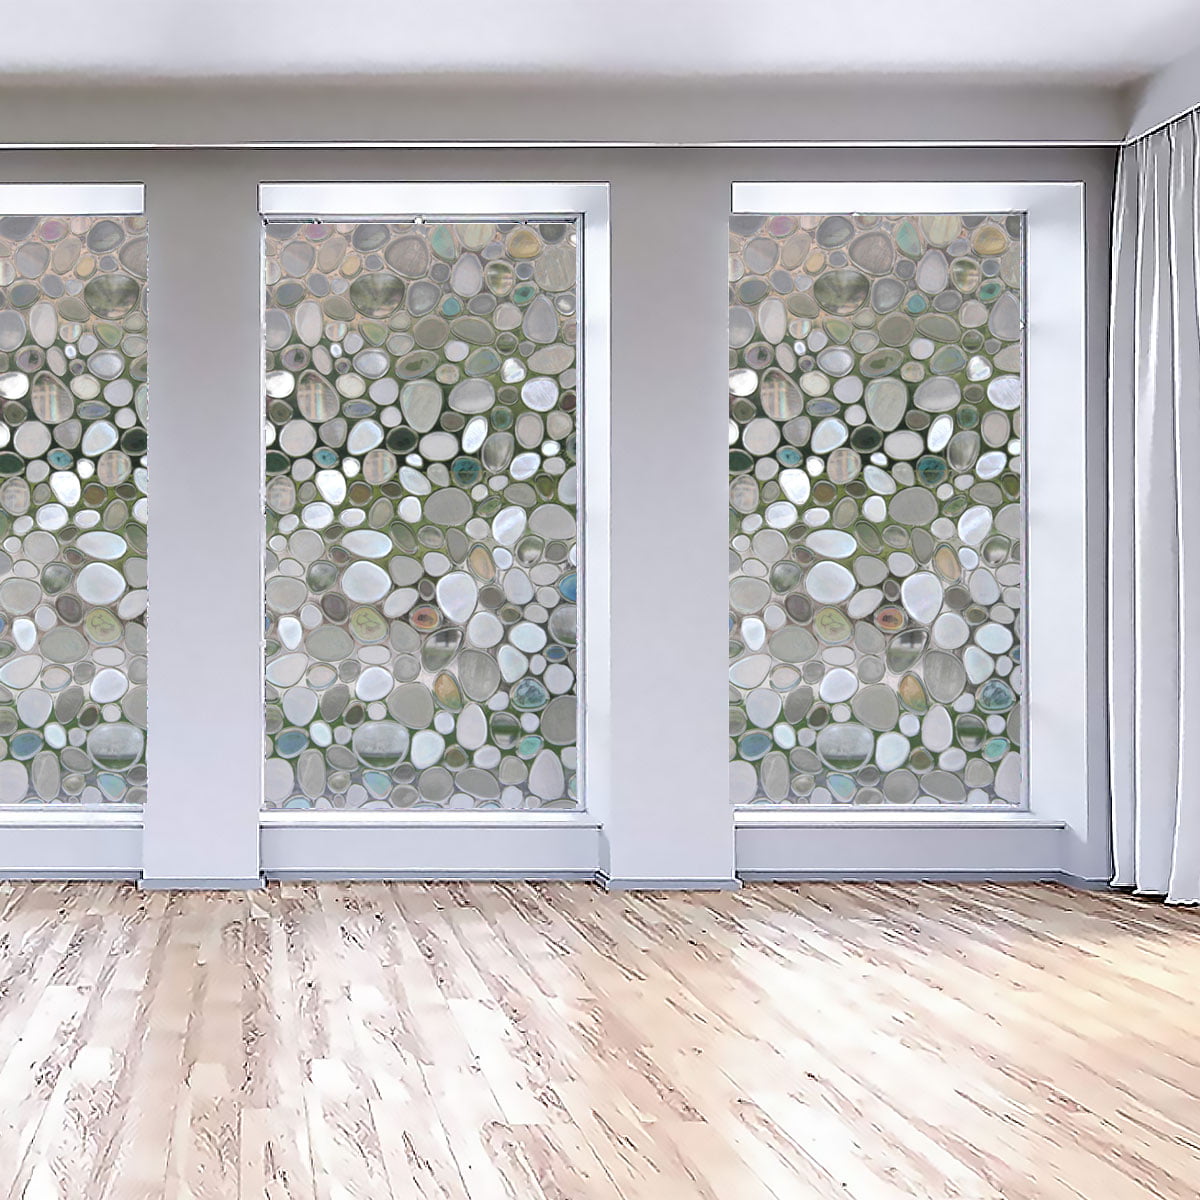 35x40'' 3D Decorative Window Film Window Privacy Film for Home Office ...